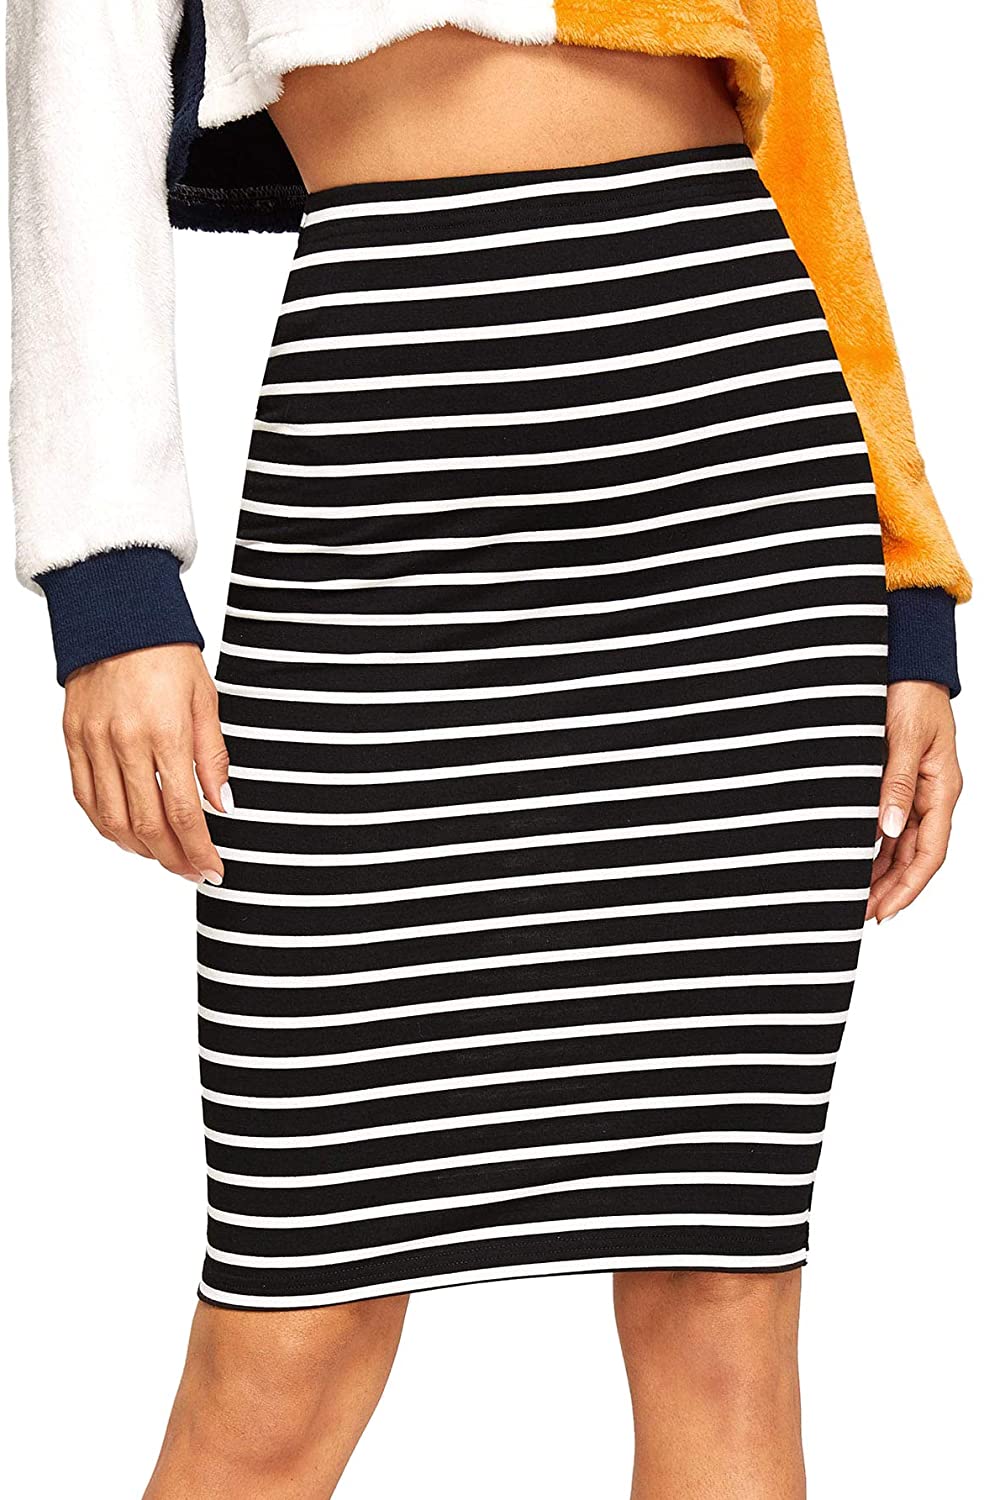 10 Best Skirts for Women over 40 Years Old That Will Make You Look ...